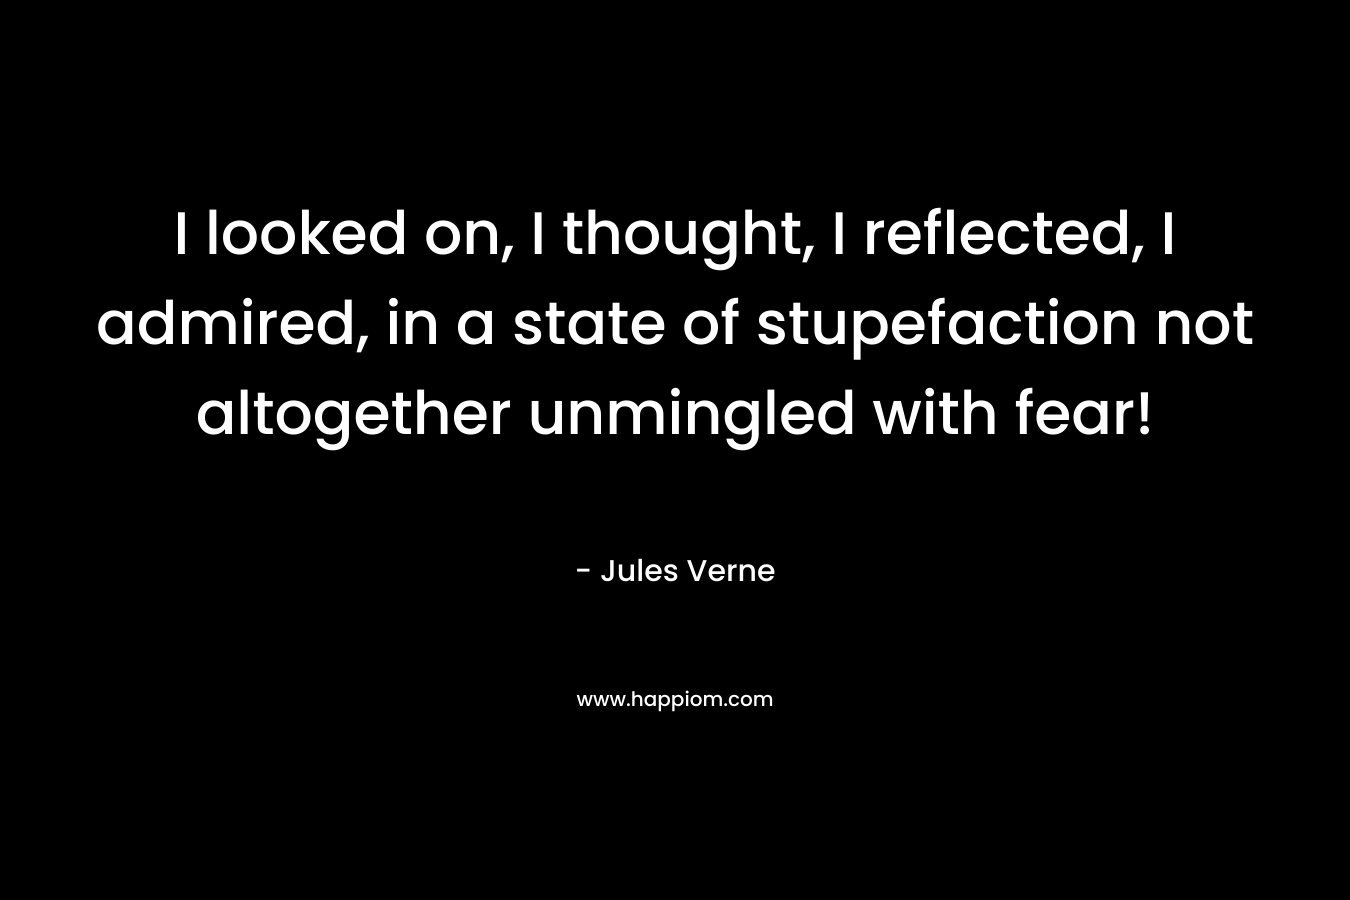 I looked on, I thought, I reflected, I admired, in a state of stupefaction not altogether unmingled with fear!